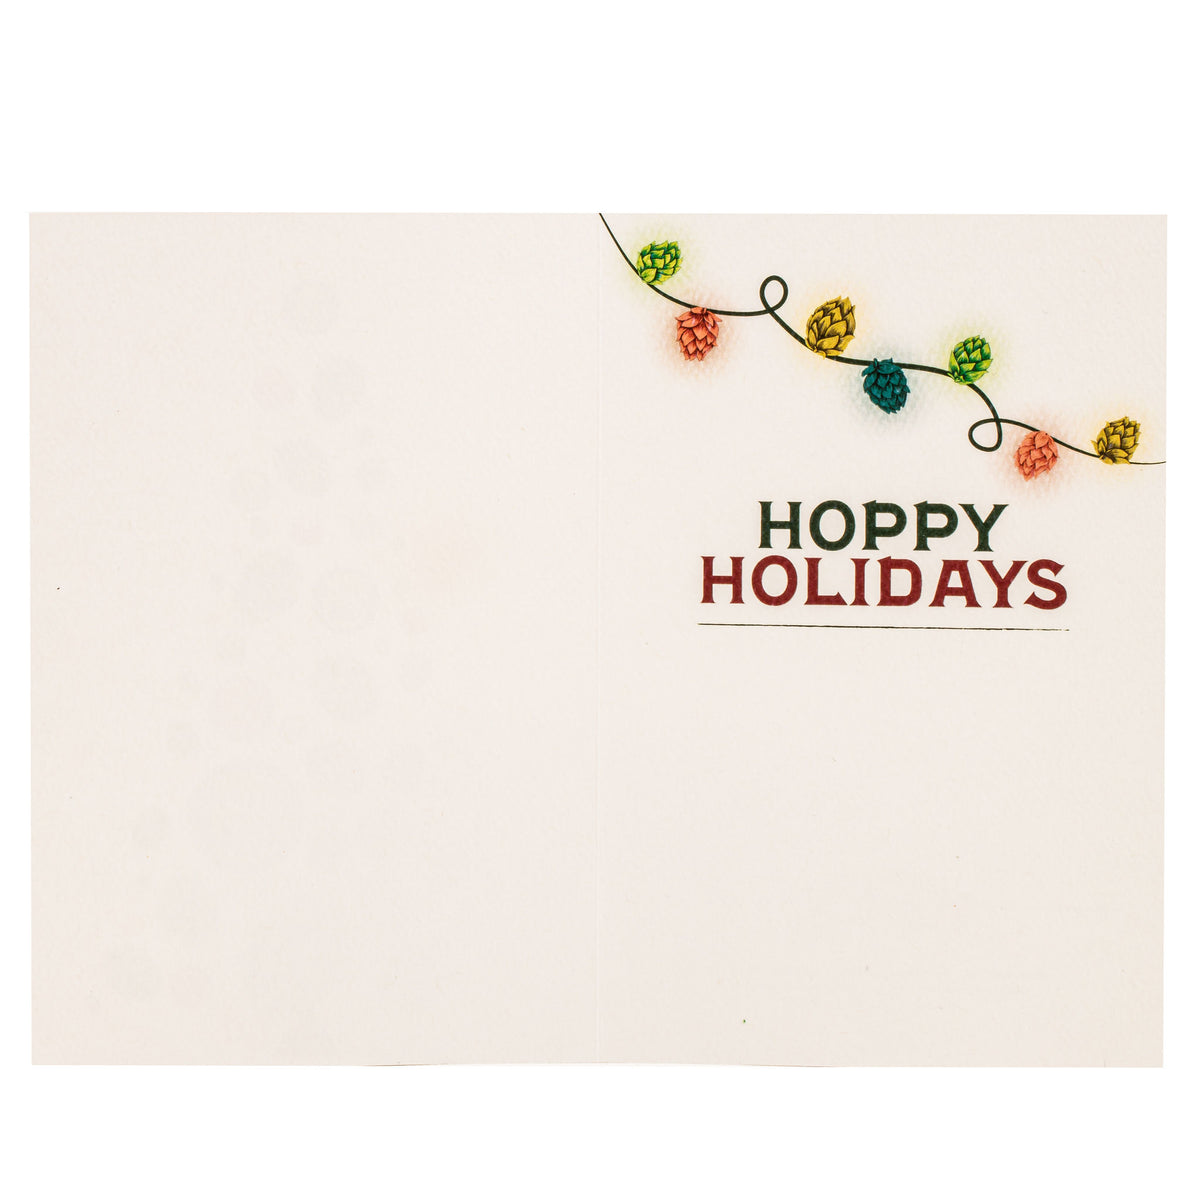 Holiday Greeting Card with Hoppy Holidays message